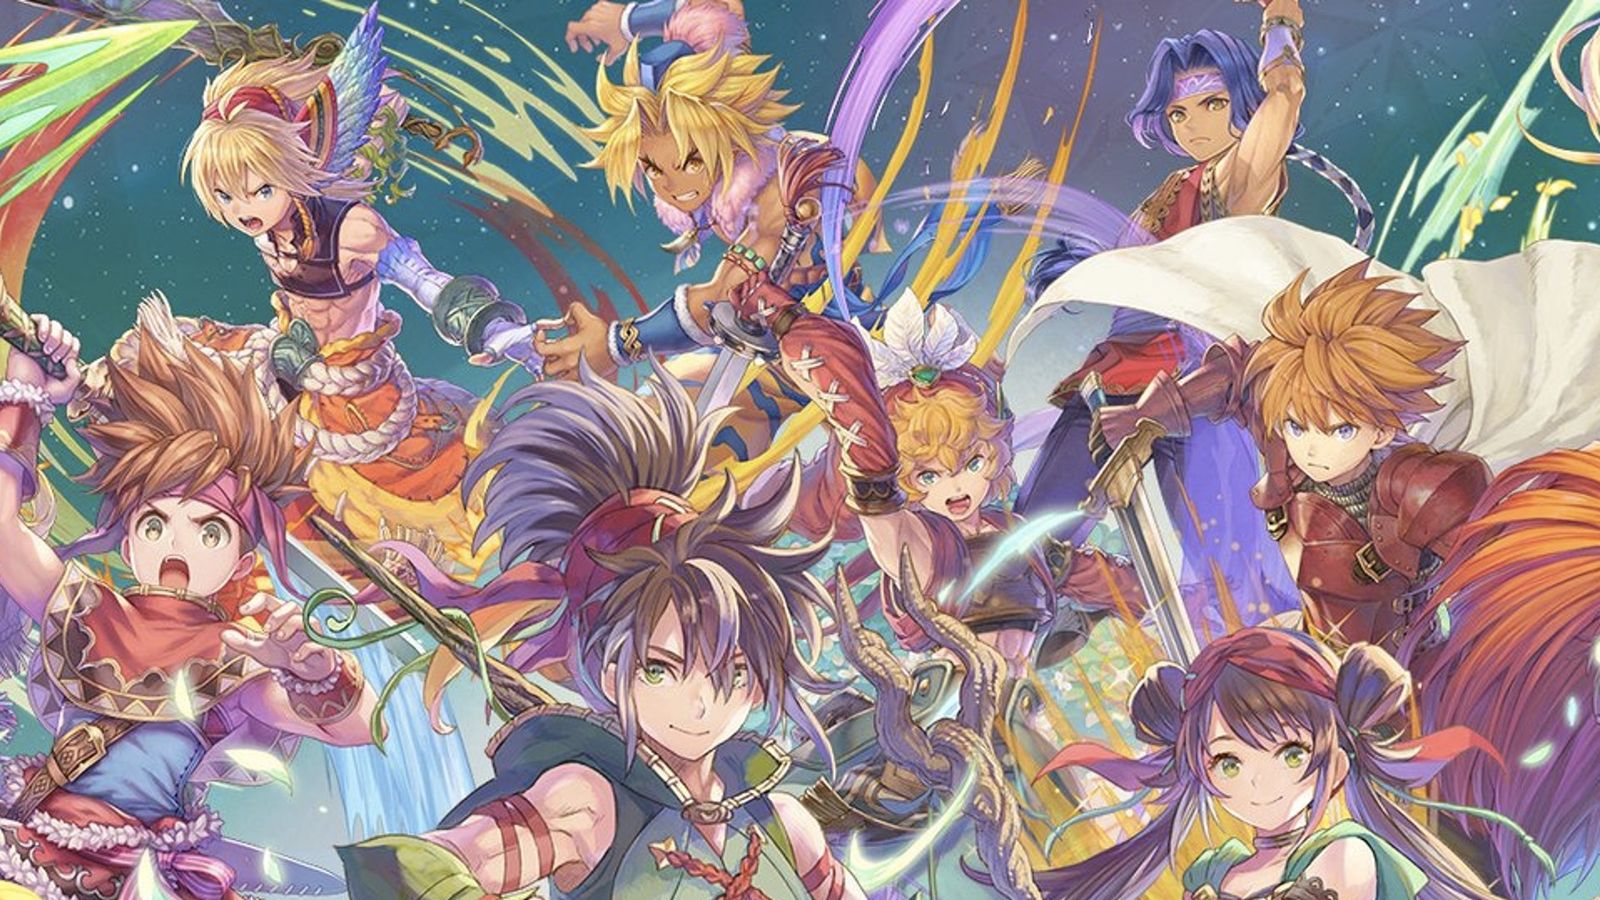 Image of a group of characters in Echoes of Mana.